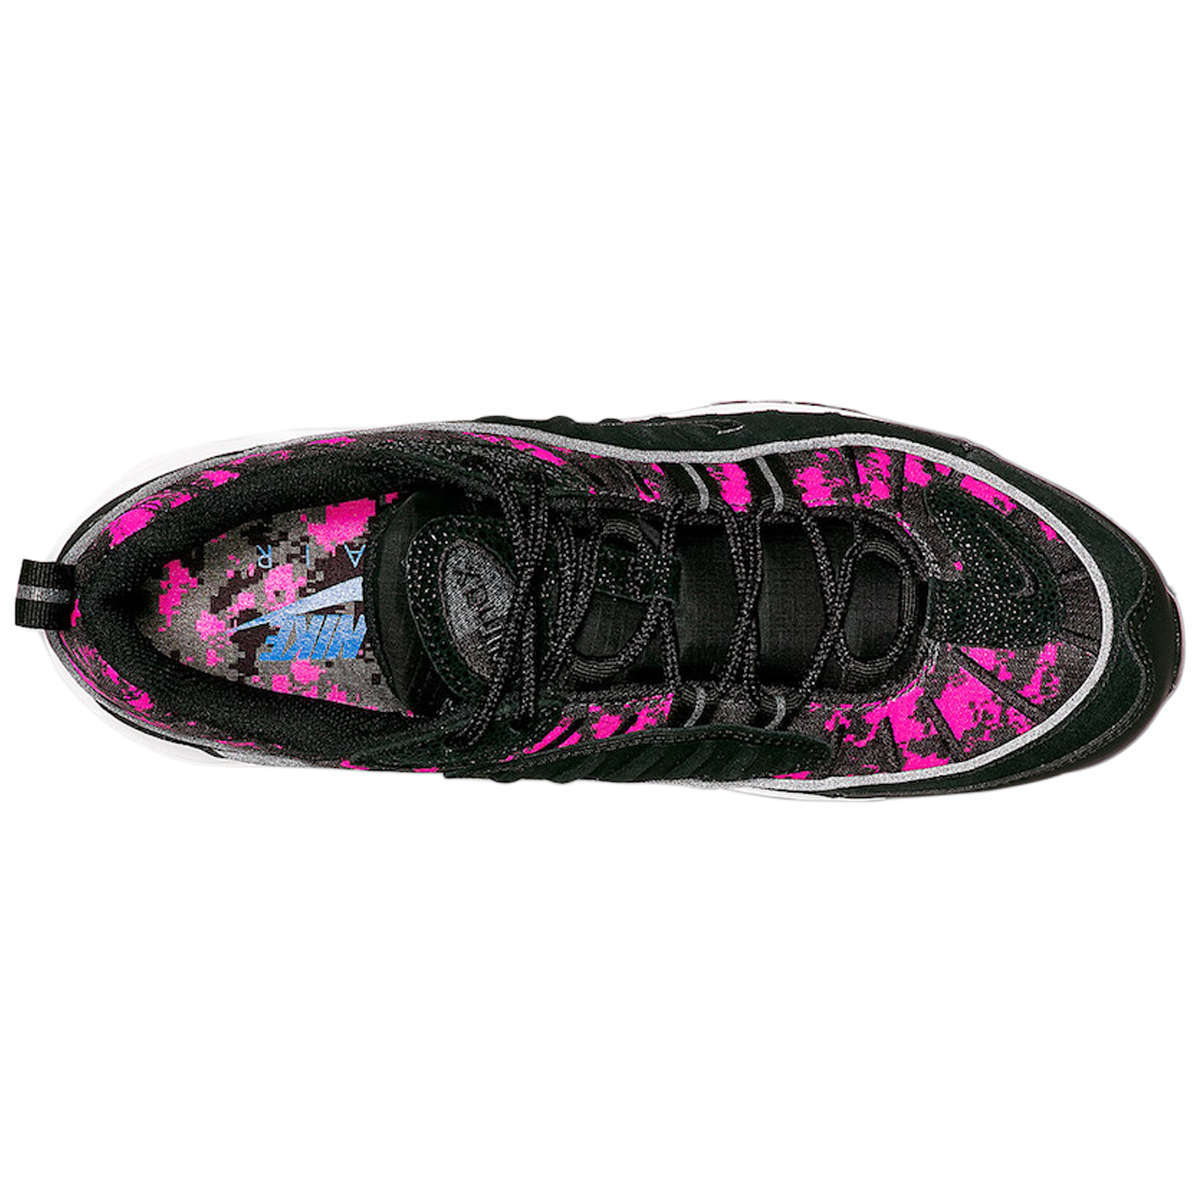 Nike Air Max 98 PRM Synthetic Textile Women's Low-Top Trainers#color_black hyper pink